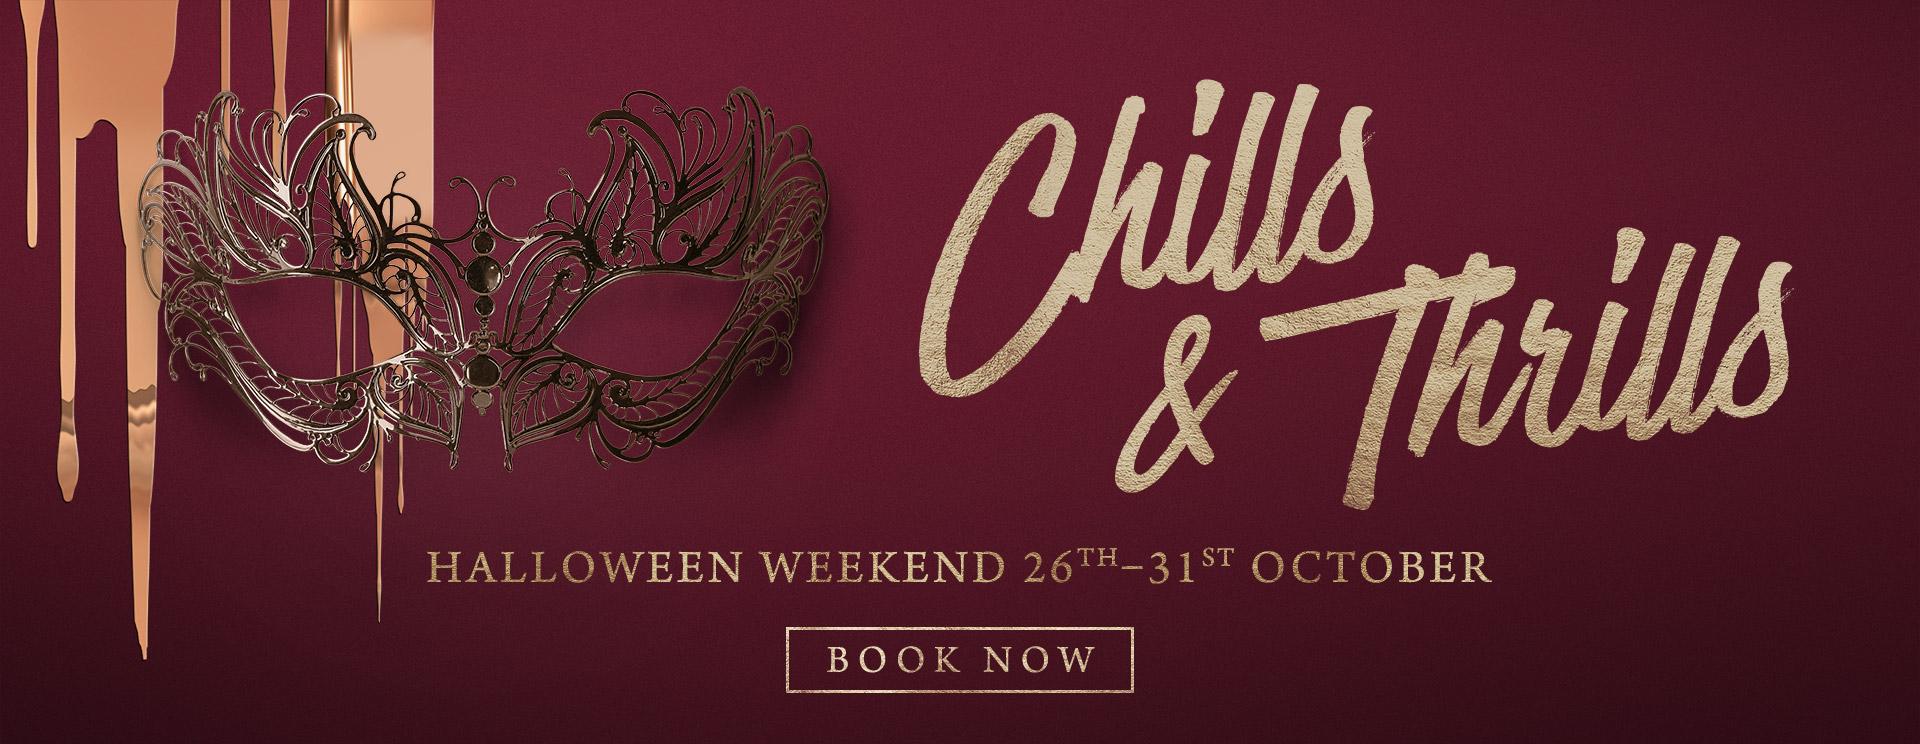 Chills & Thrills this Halloween at The Ferry